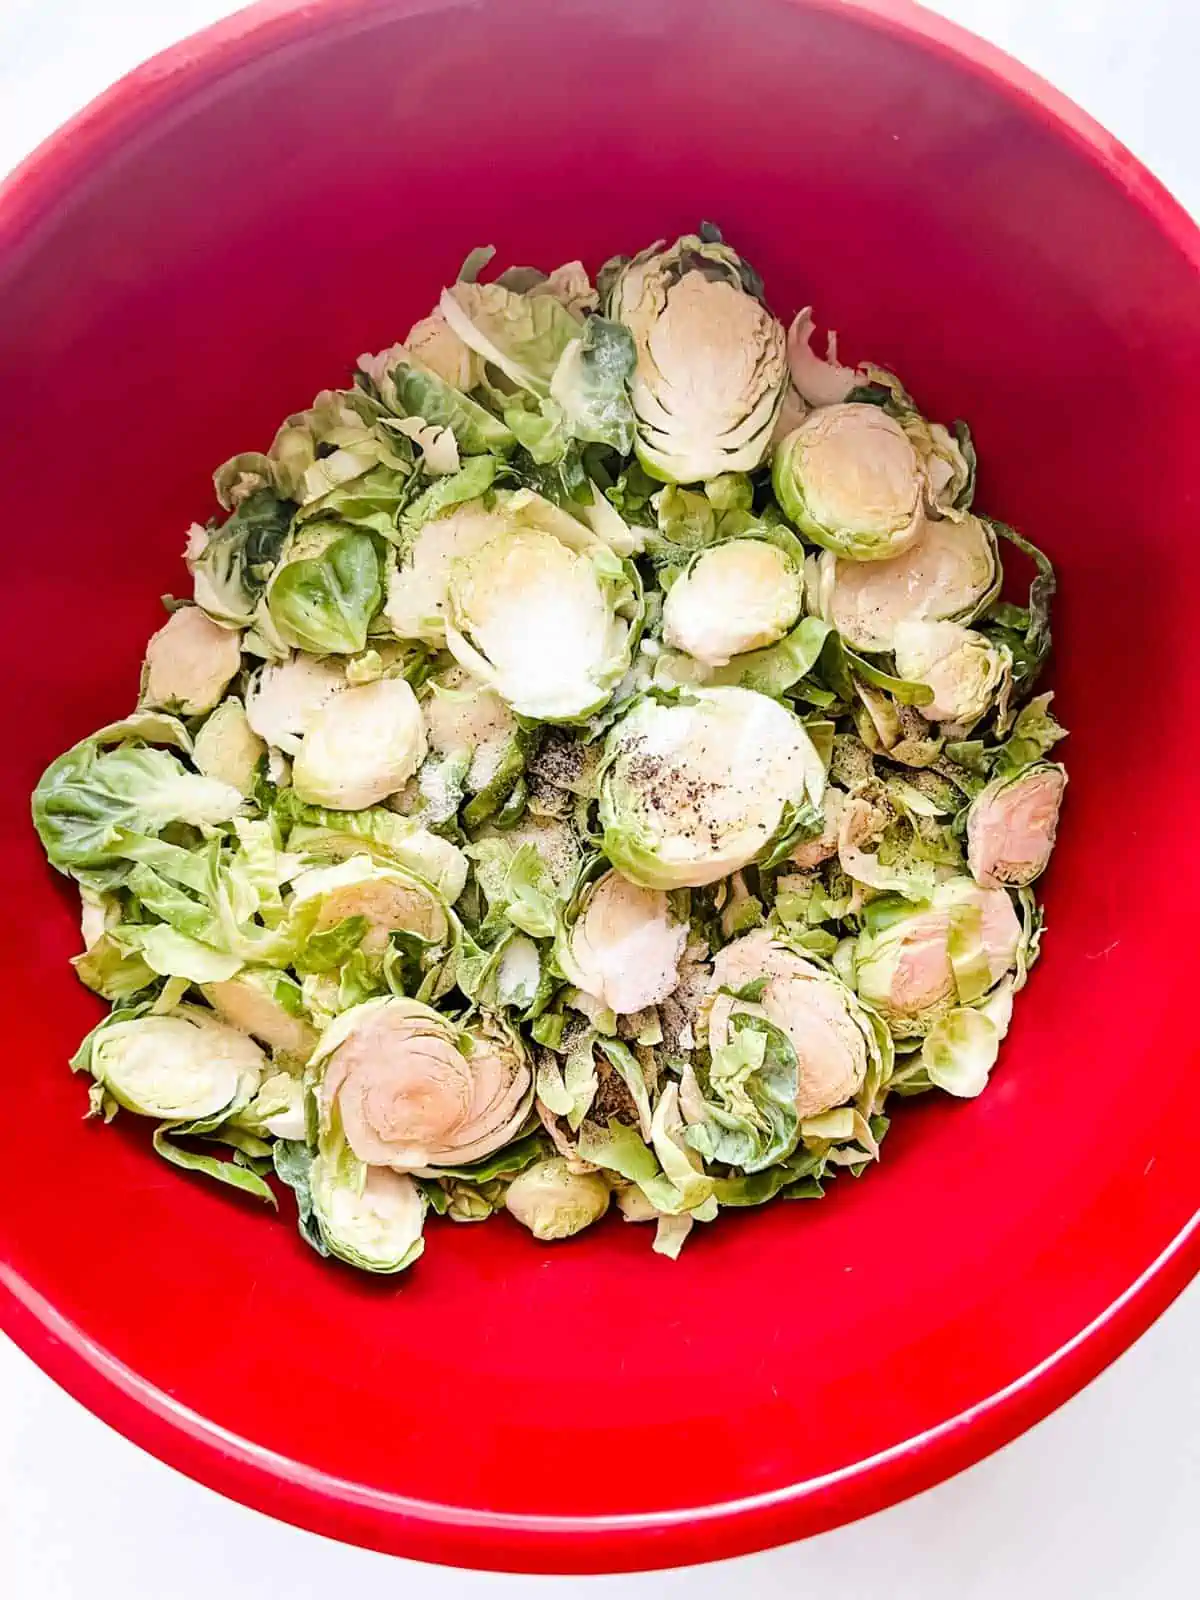 Photo of a red bowl with shaved brussels sprouts, seasonings, and oil.